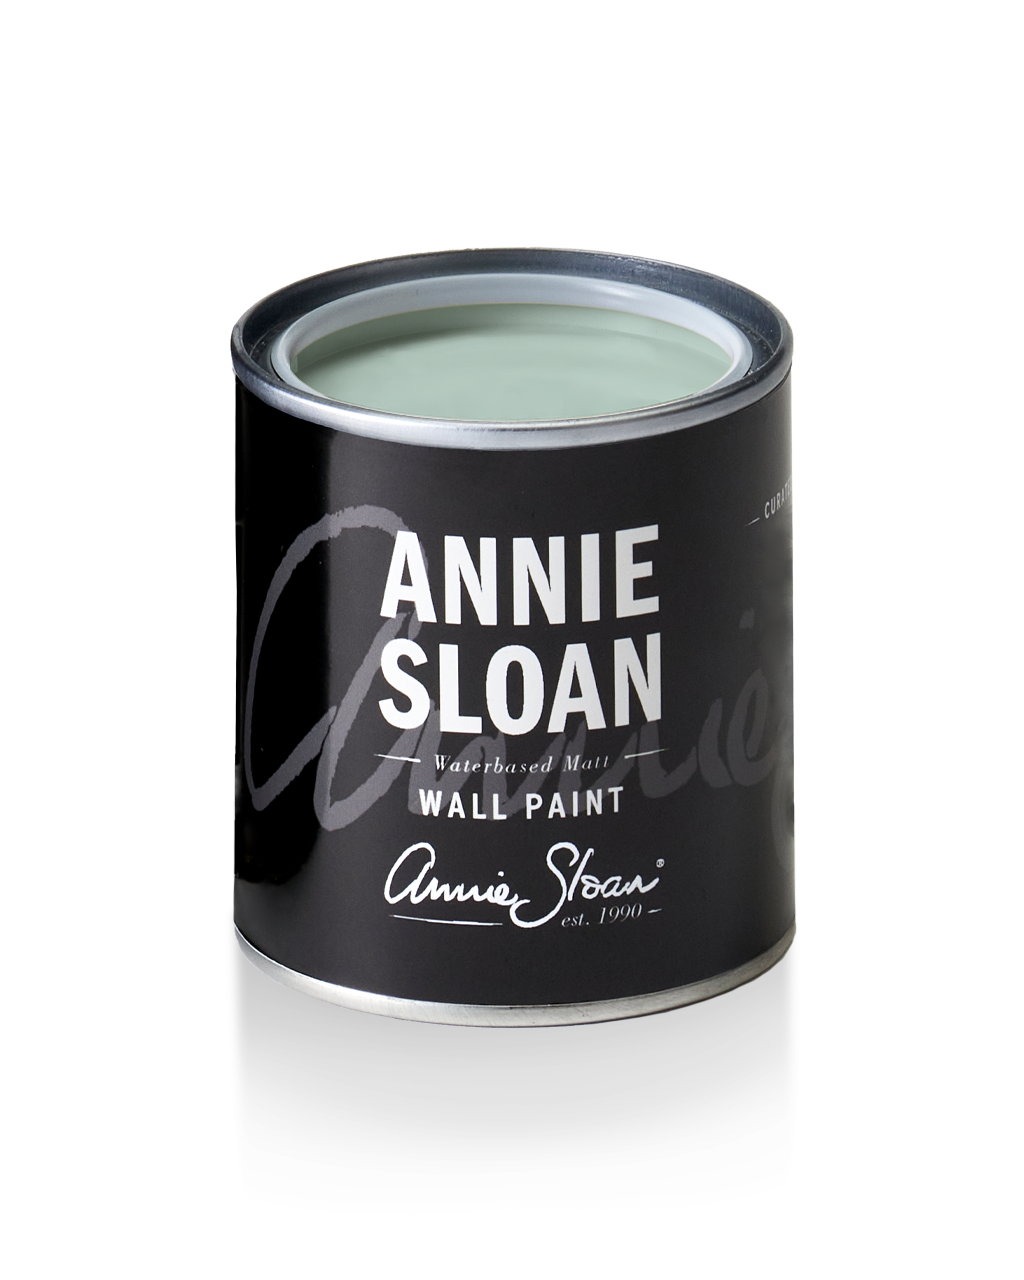 120ml tin of Upstate Blue wall paint by Annie Sloan